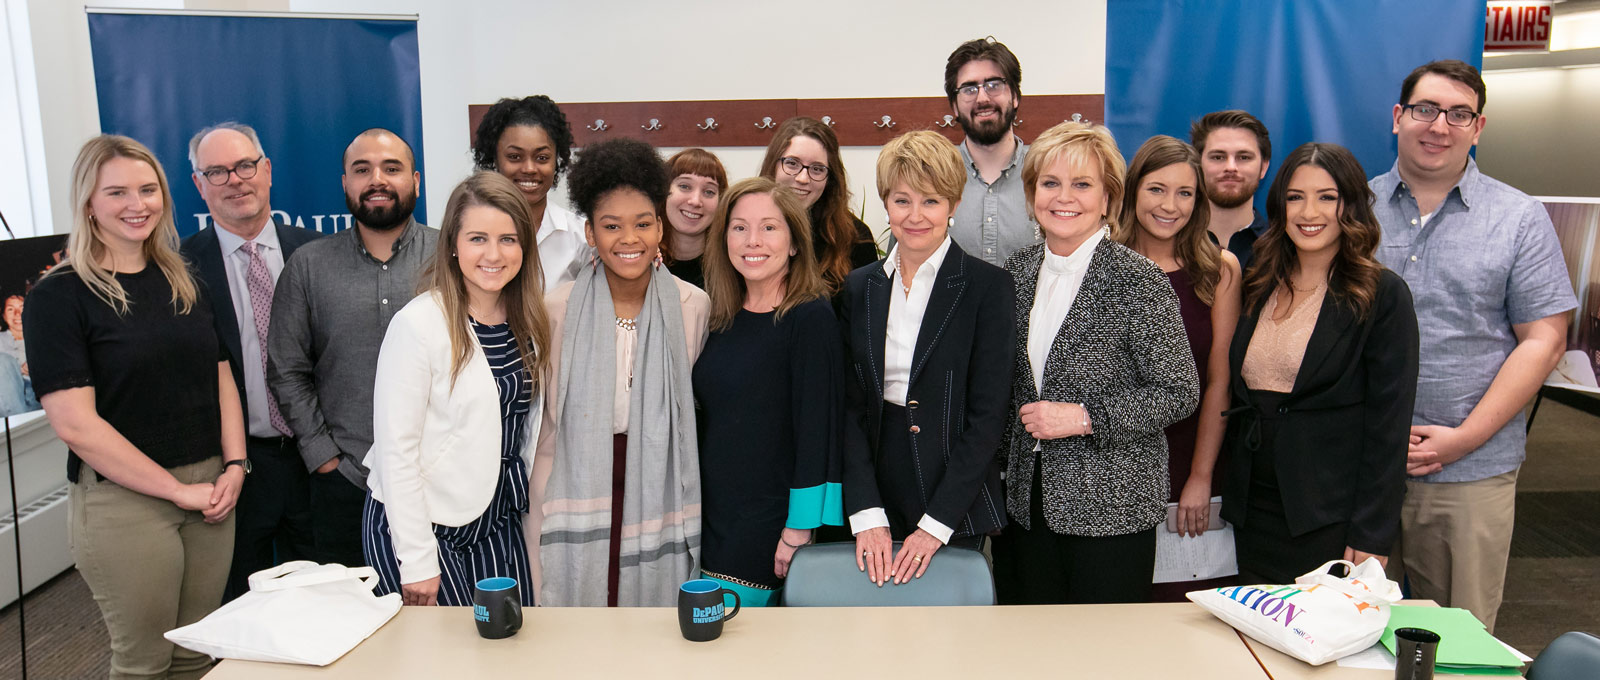 Jane Pauley and Ann Pistone with DePaul students, 2018